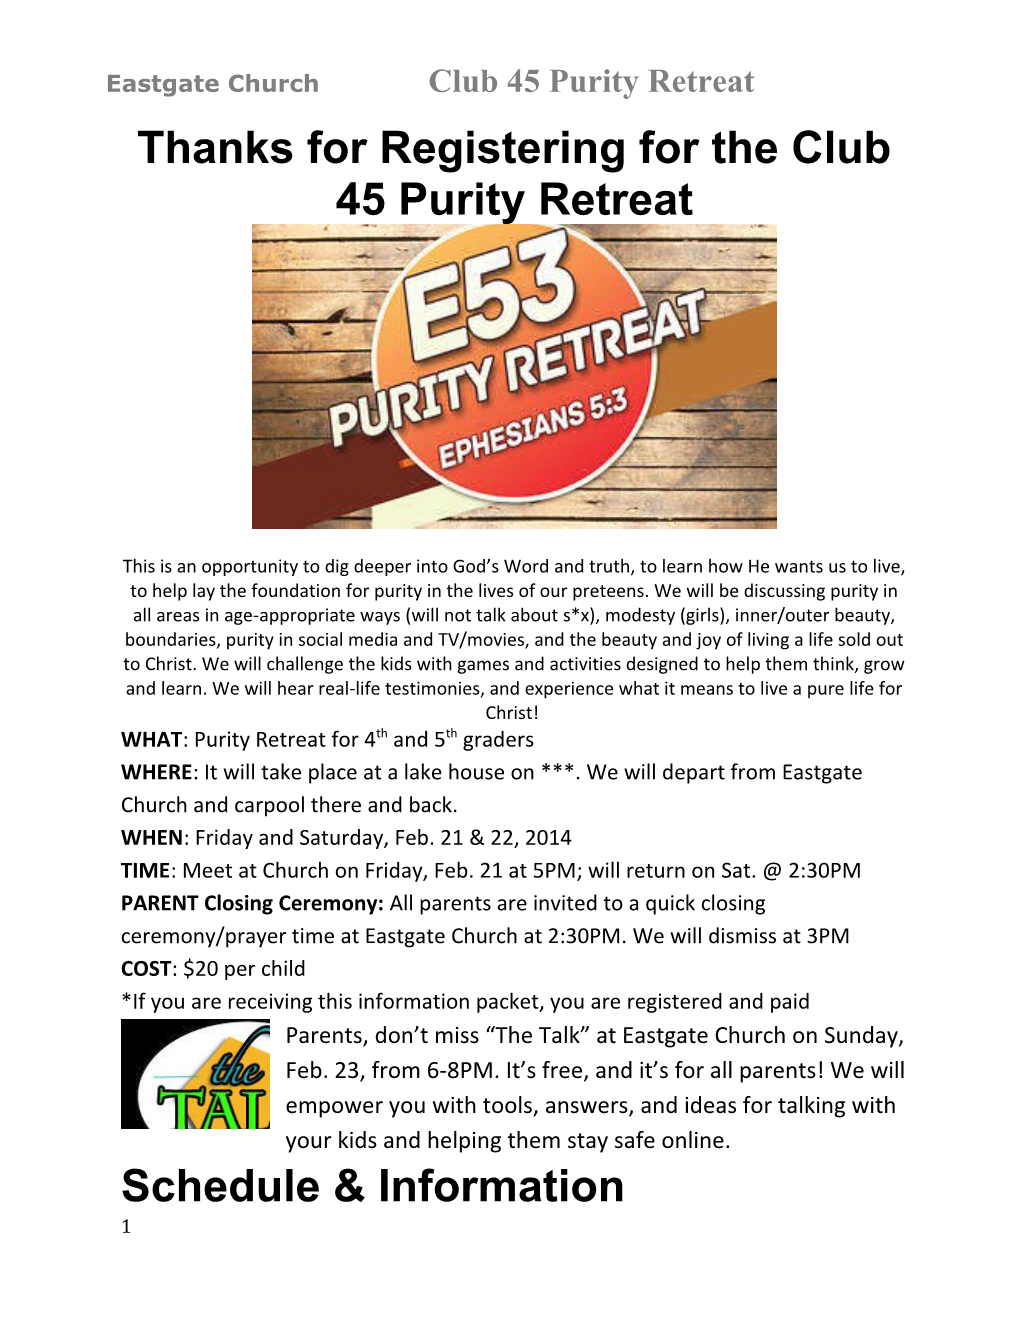 Thanks for Registering for the Club 45 Purity Retreat